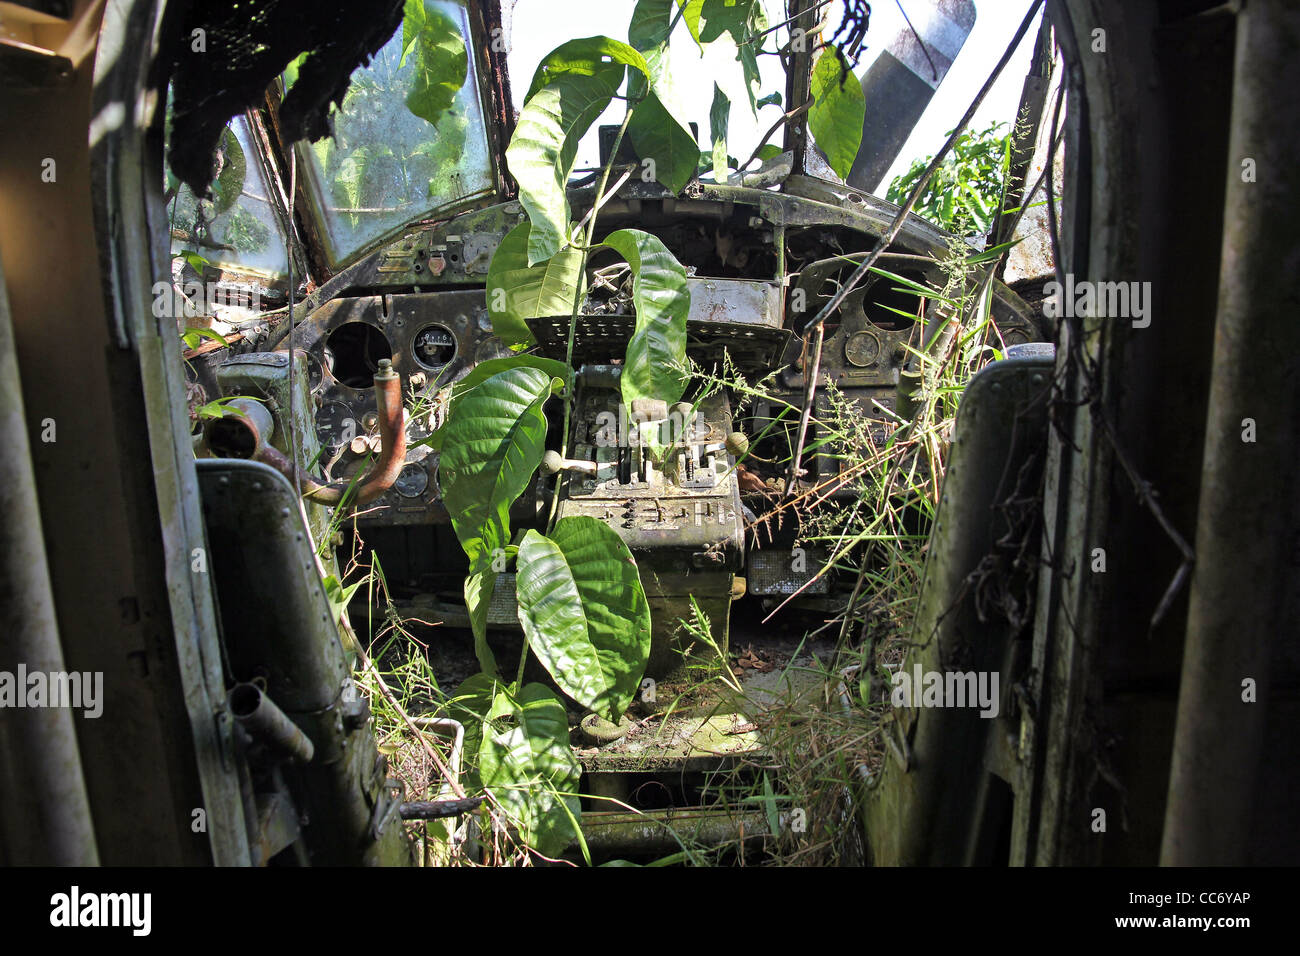 Interior view of crashed Russian Plane in the Peruvian Amazon Vines and plants growing out of control Stock Photo